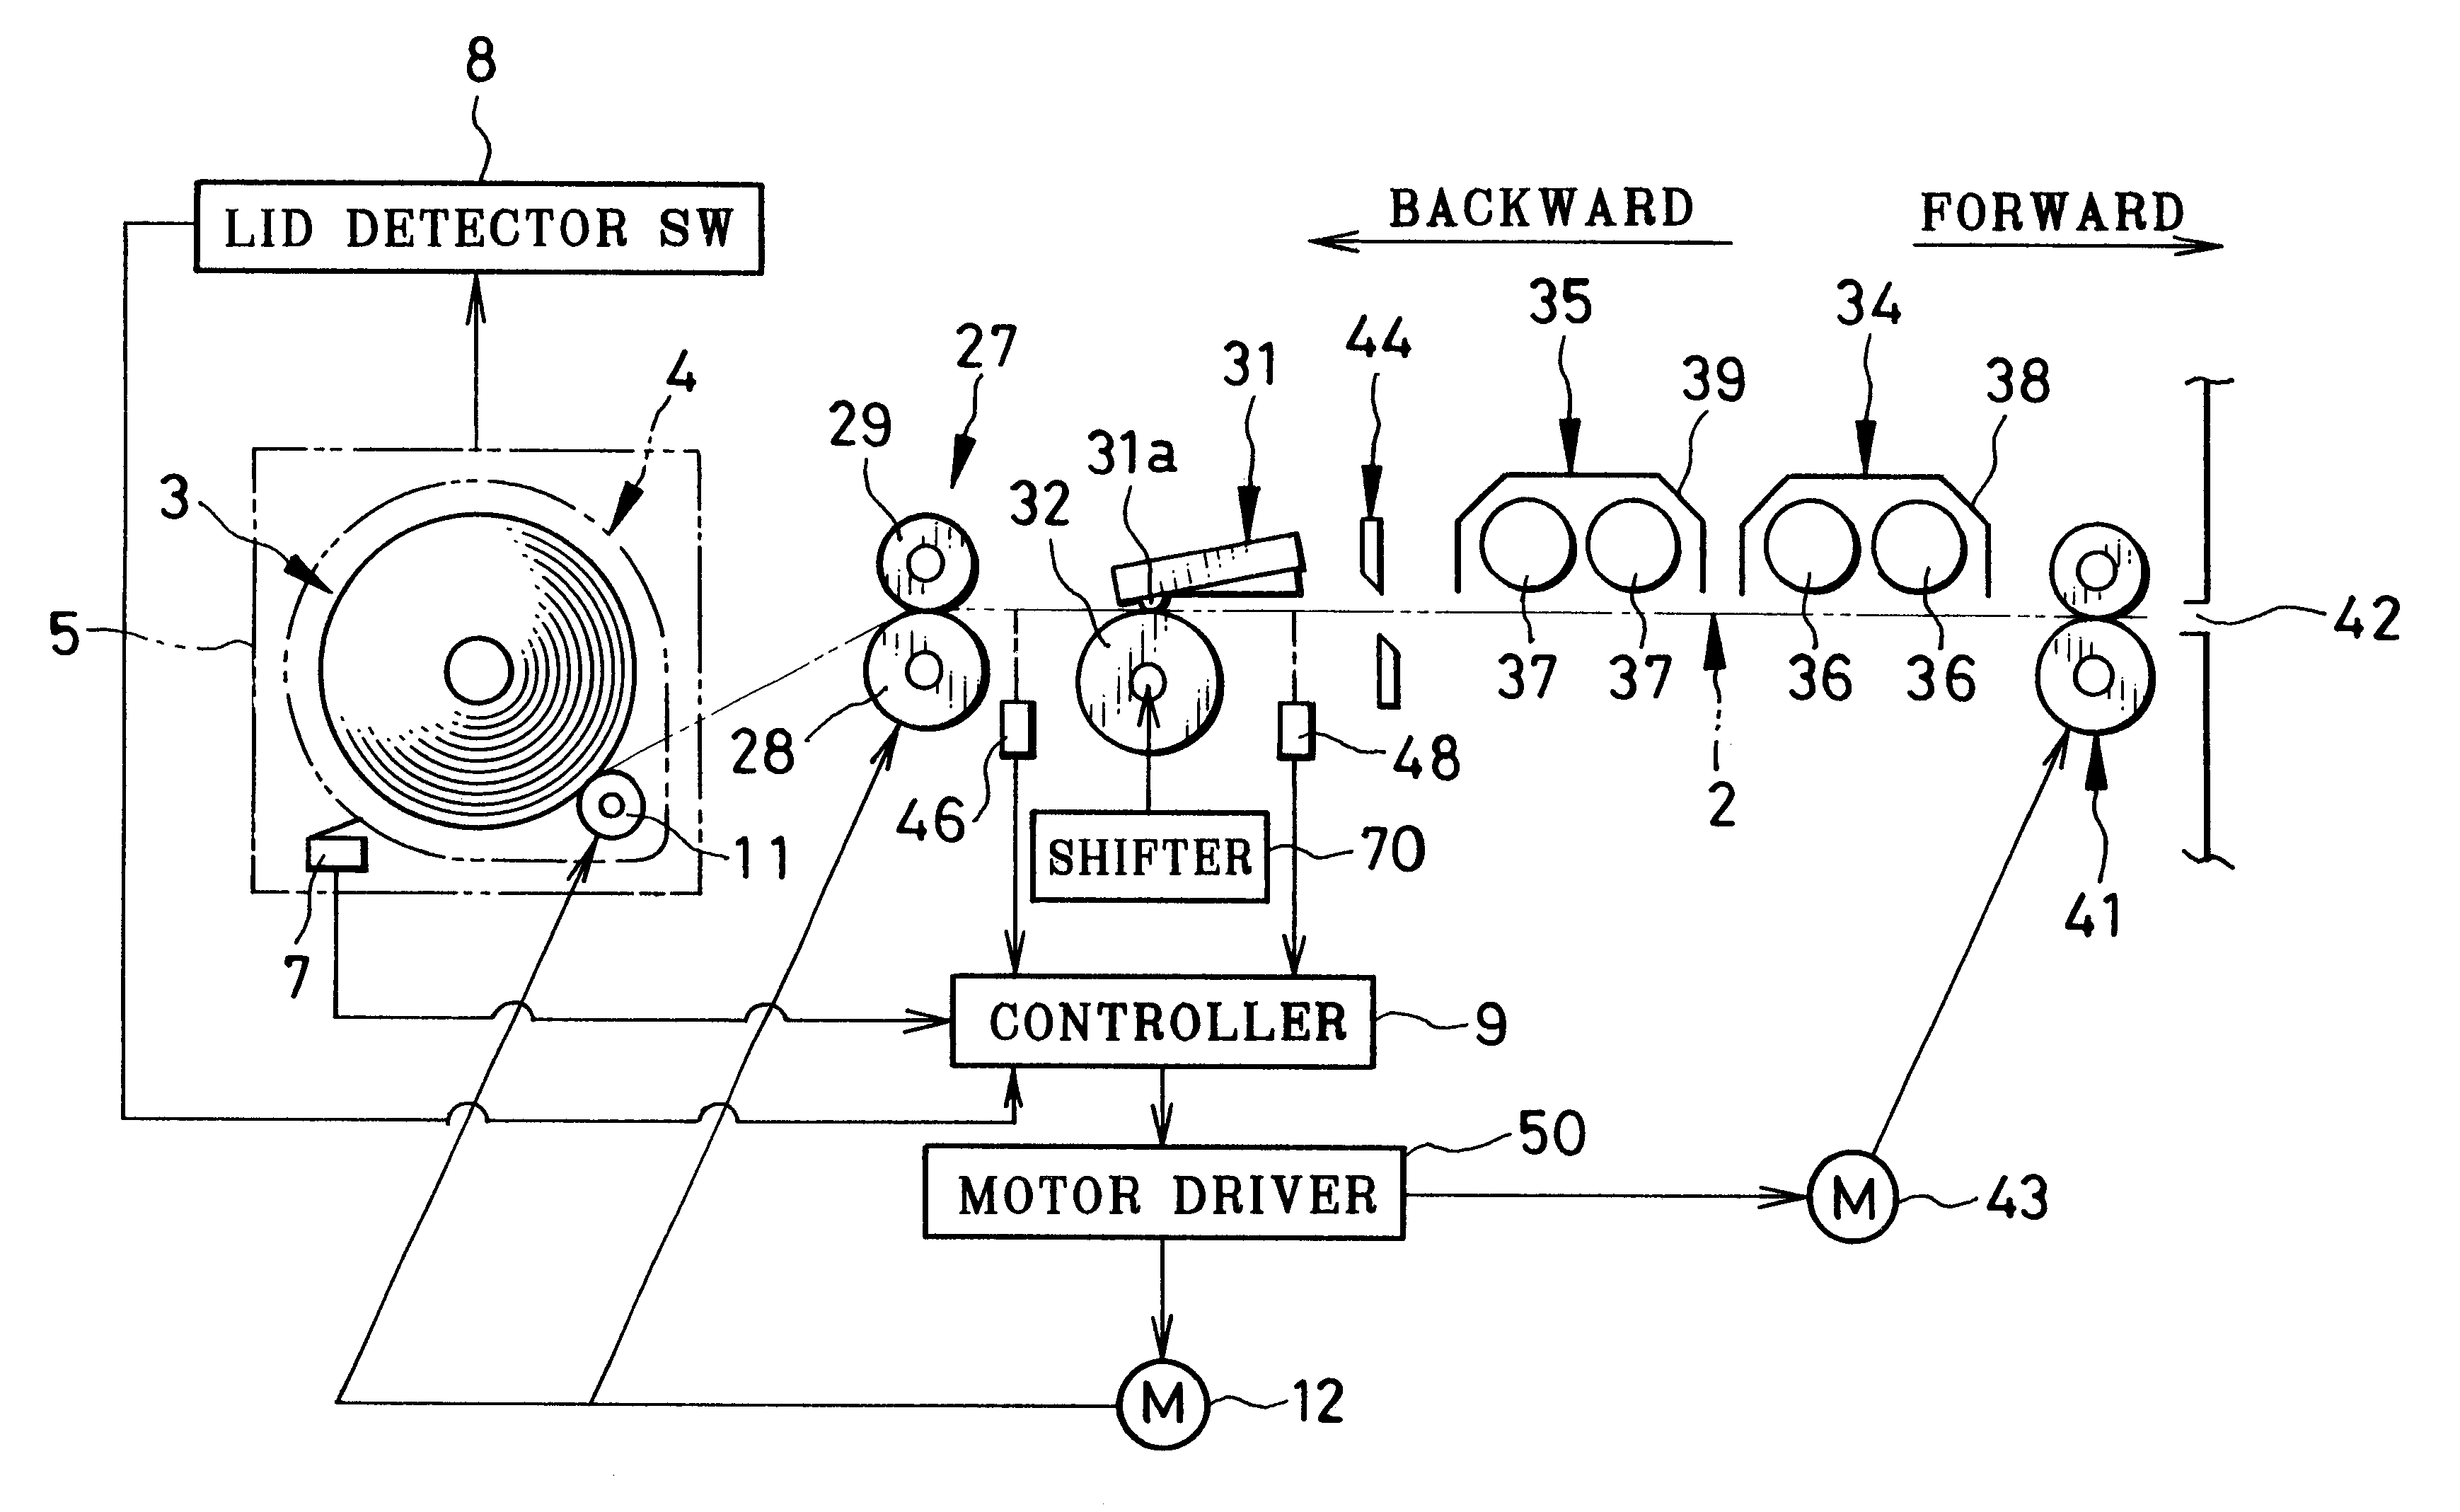 Head cleaning method and device for thermal printer, and recording sheet roll for the same